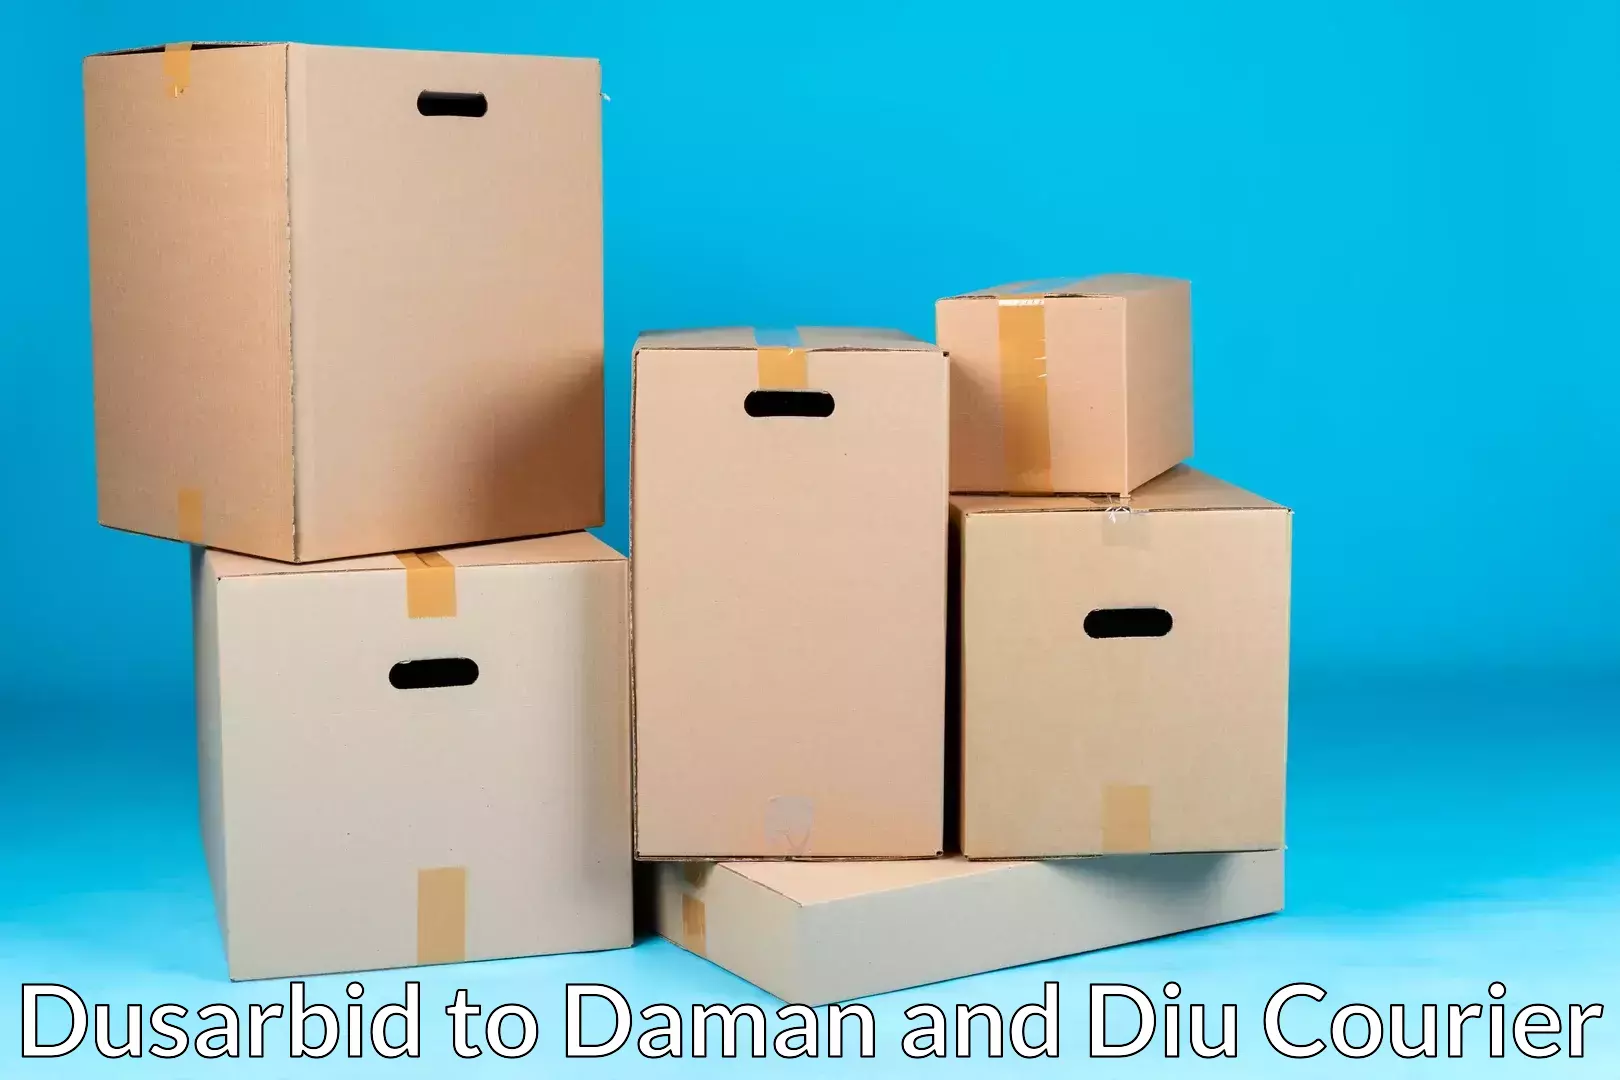 Household shifting services Dusarbid to Diu